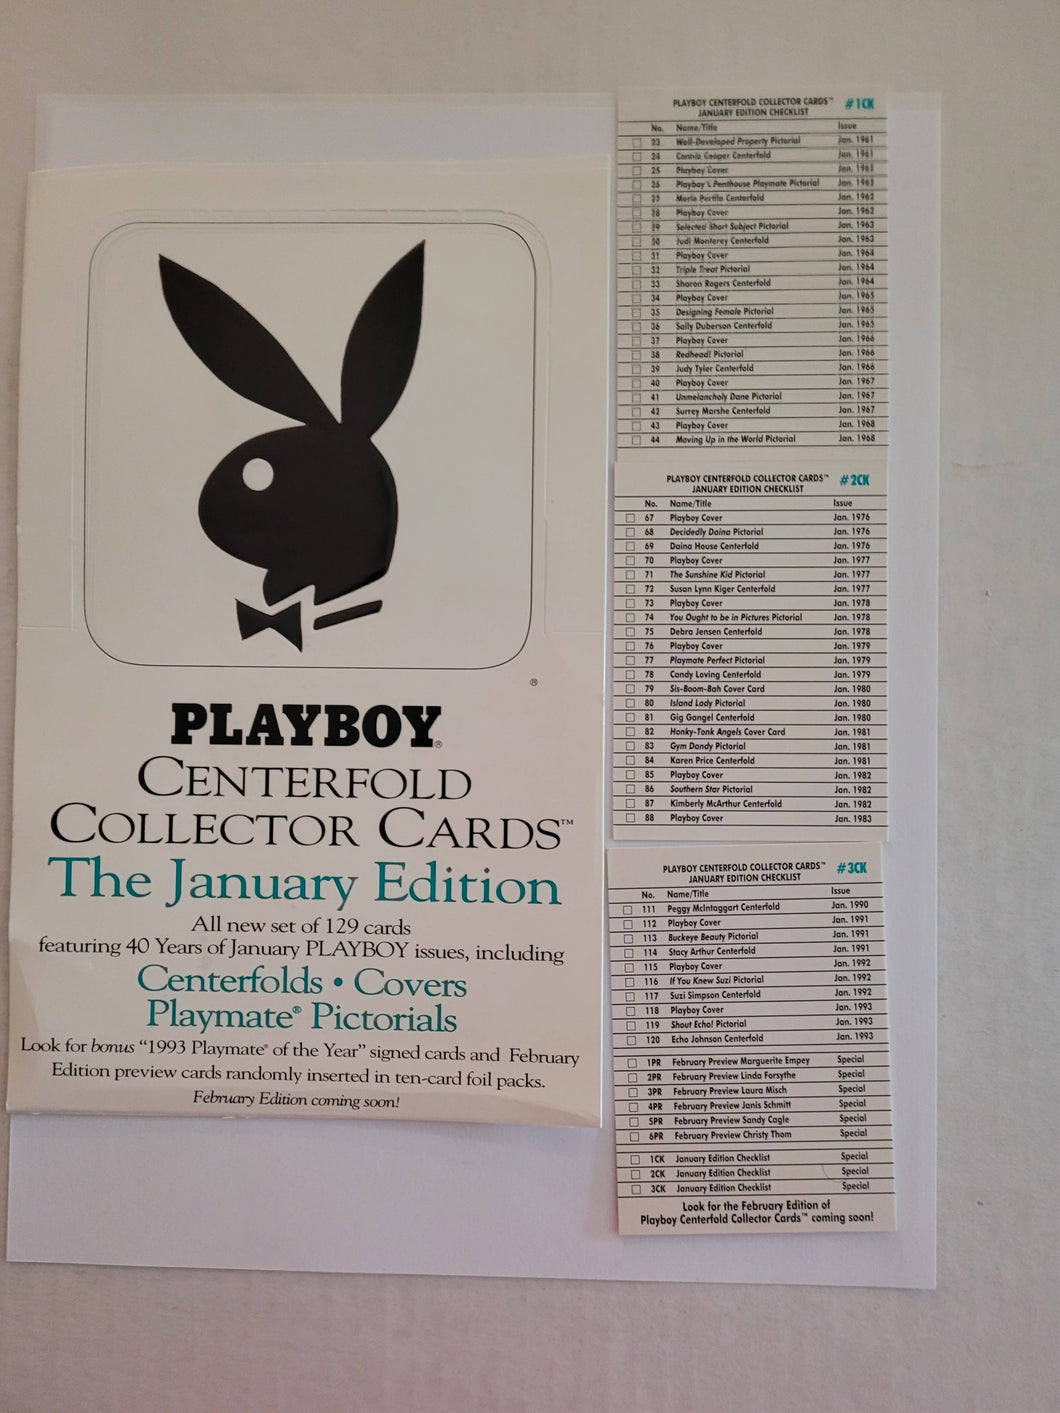 PLAYBOY CENTERFOLD COLLECTOR CARDS